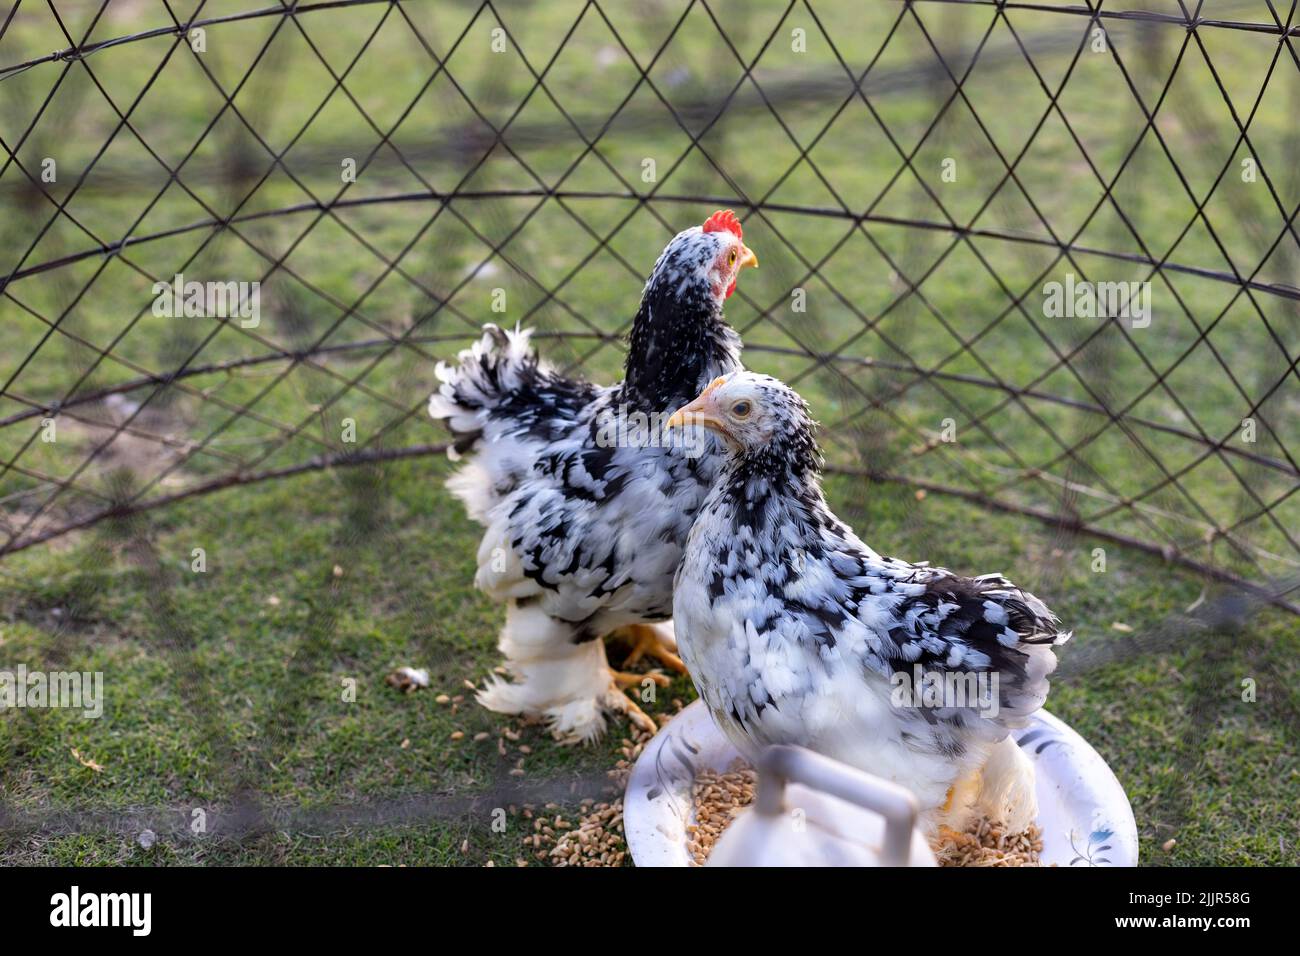 Mottled black and white cochin chicken in a cage. selective focus Stock Photo